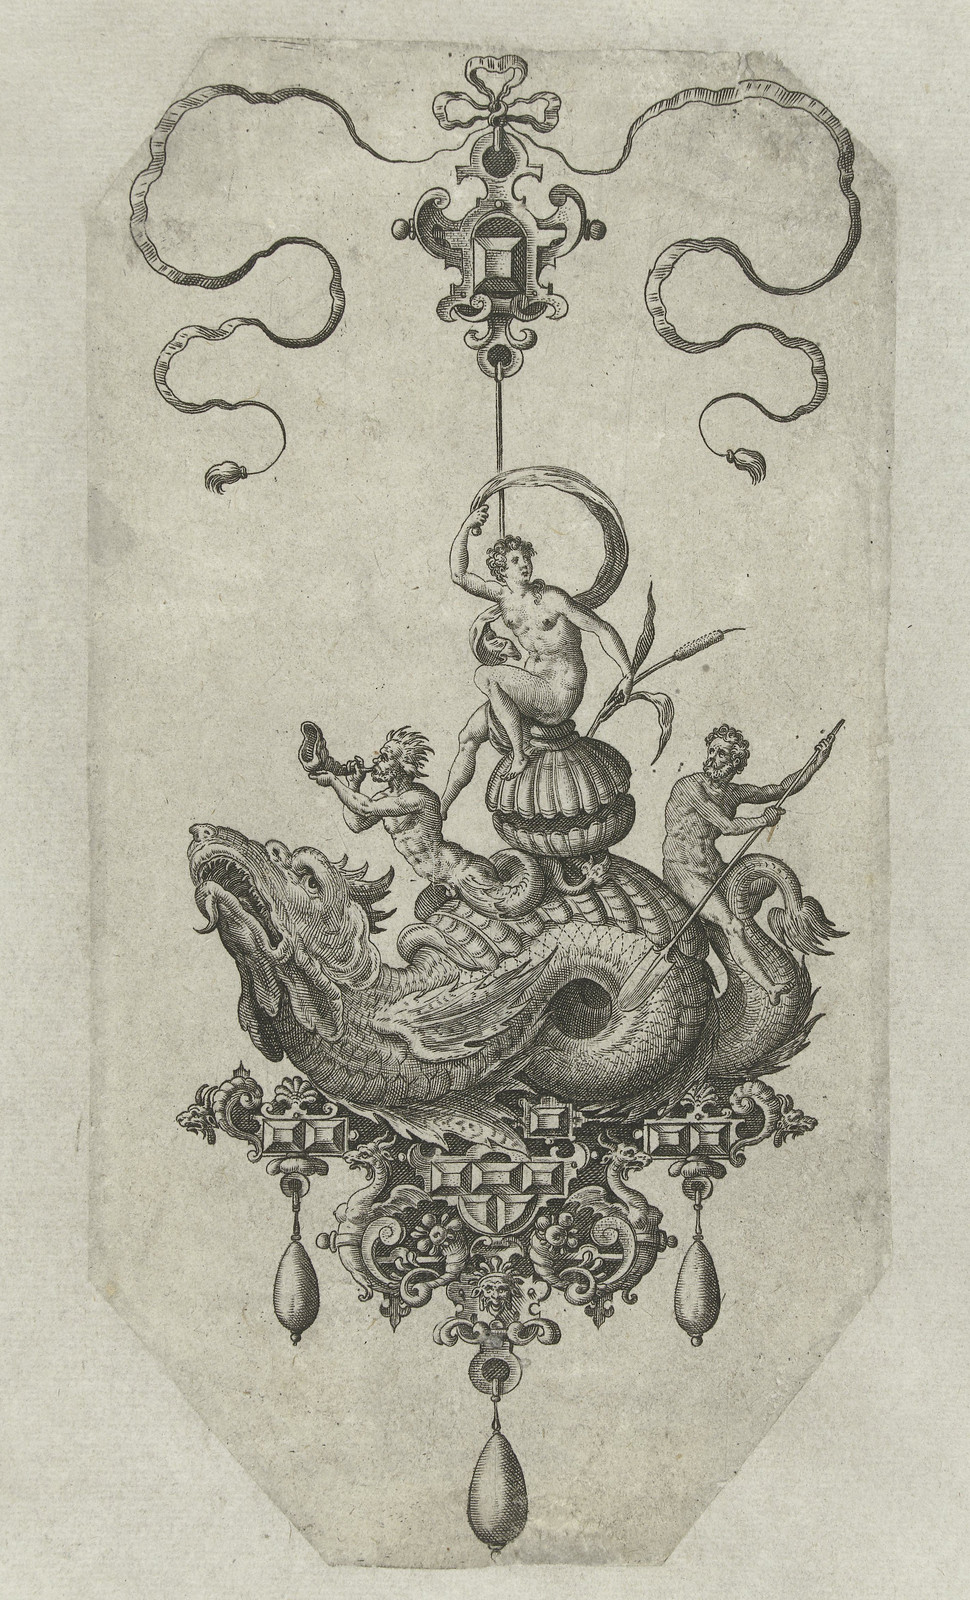 Dragon pendant with a double shell on its back - Adriaen Collaert and Hans Collaert (I) attributed as printmakers, published by Philips Galle, 1582